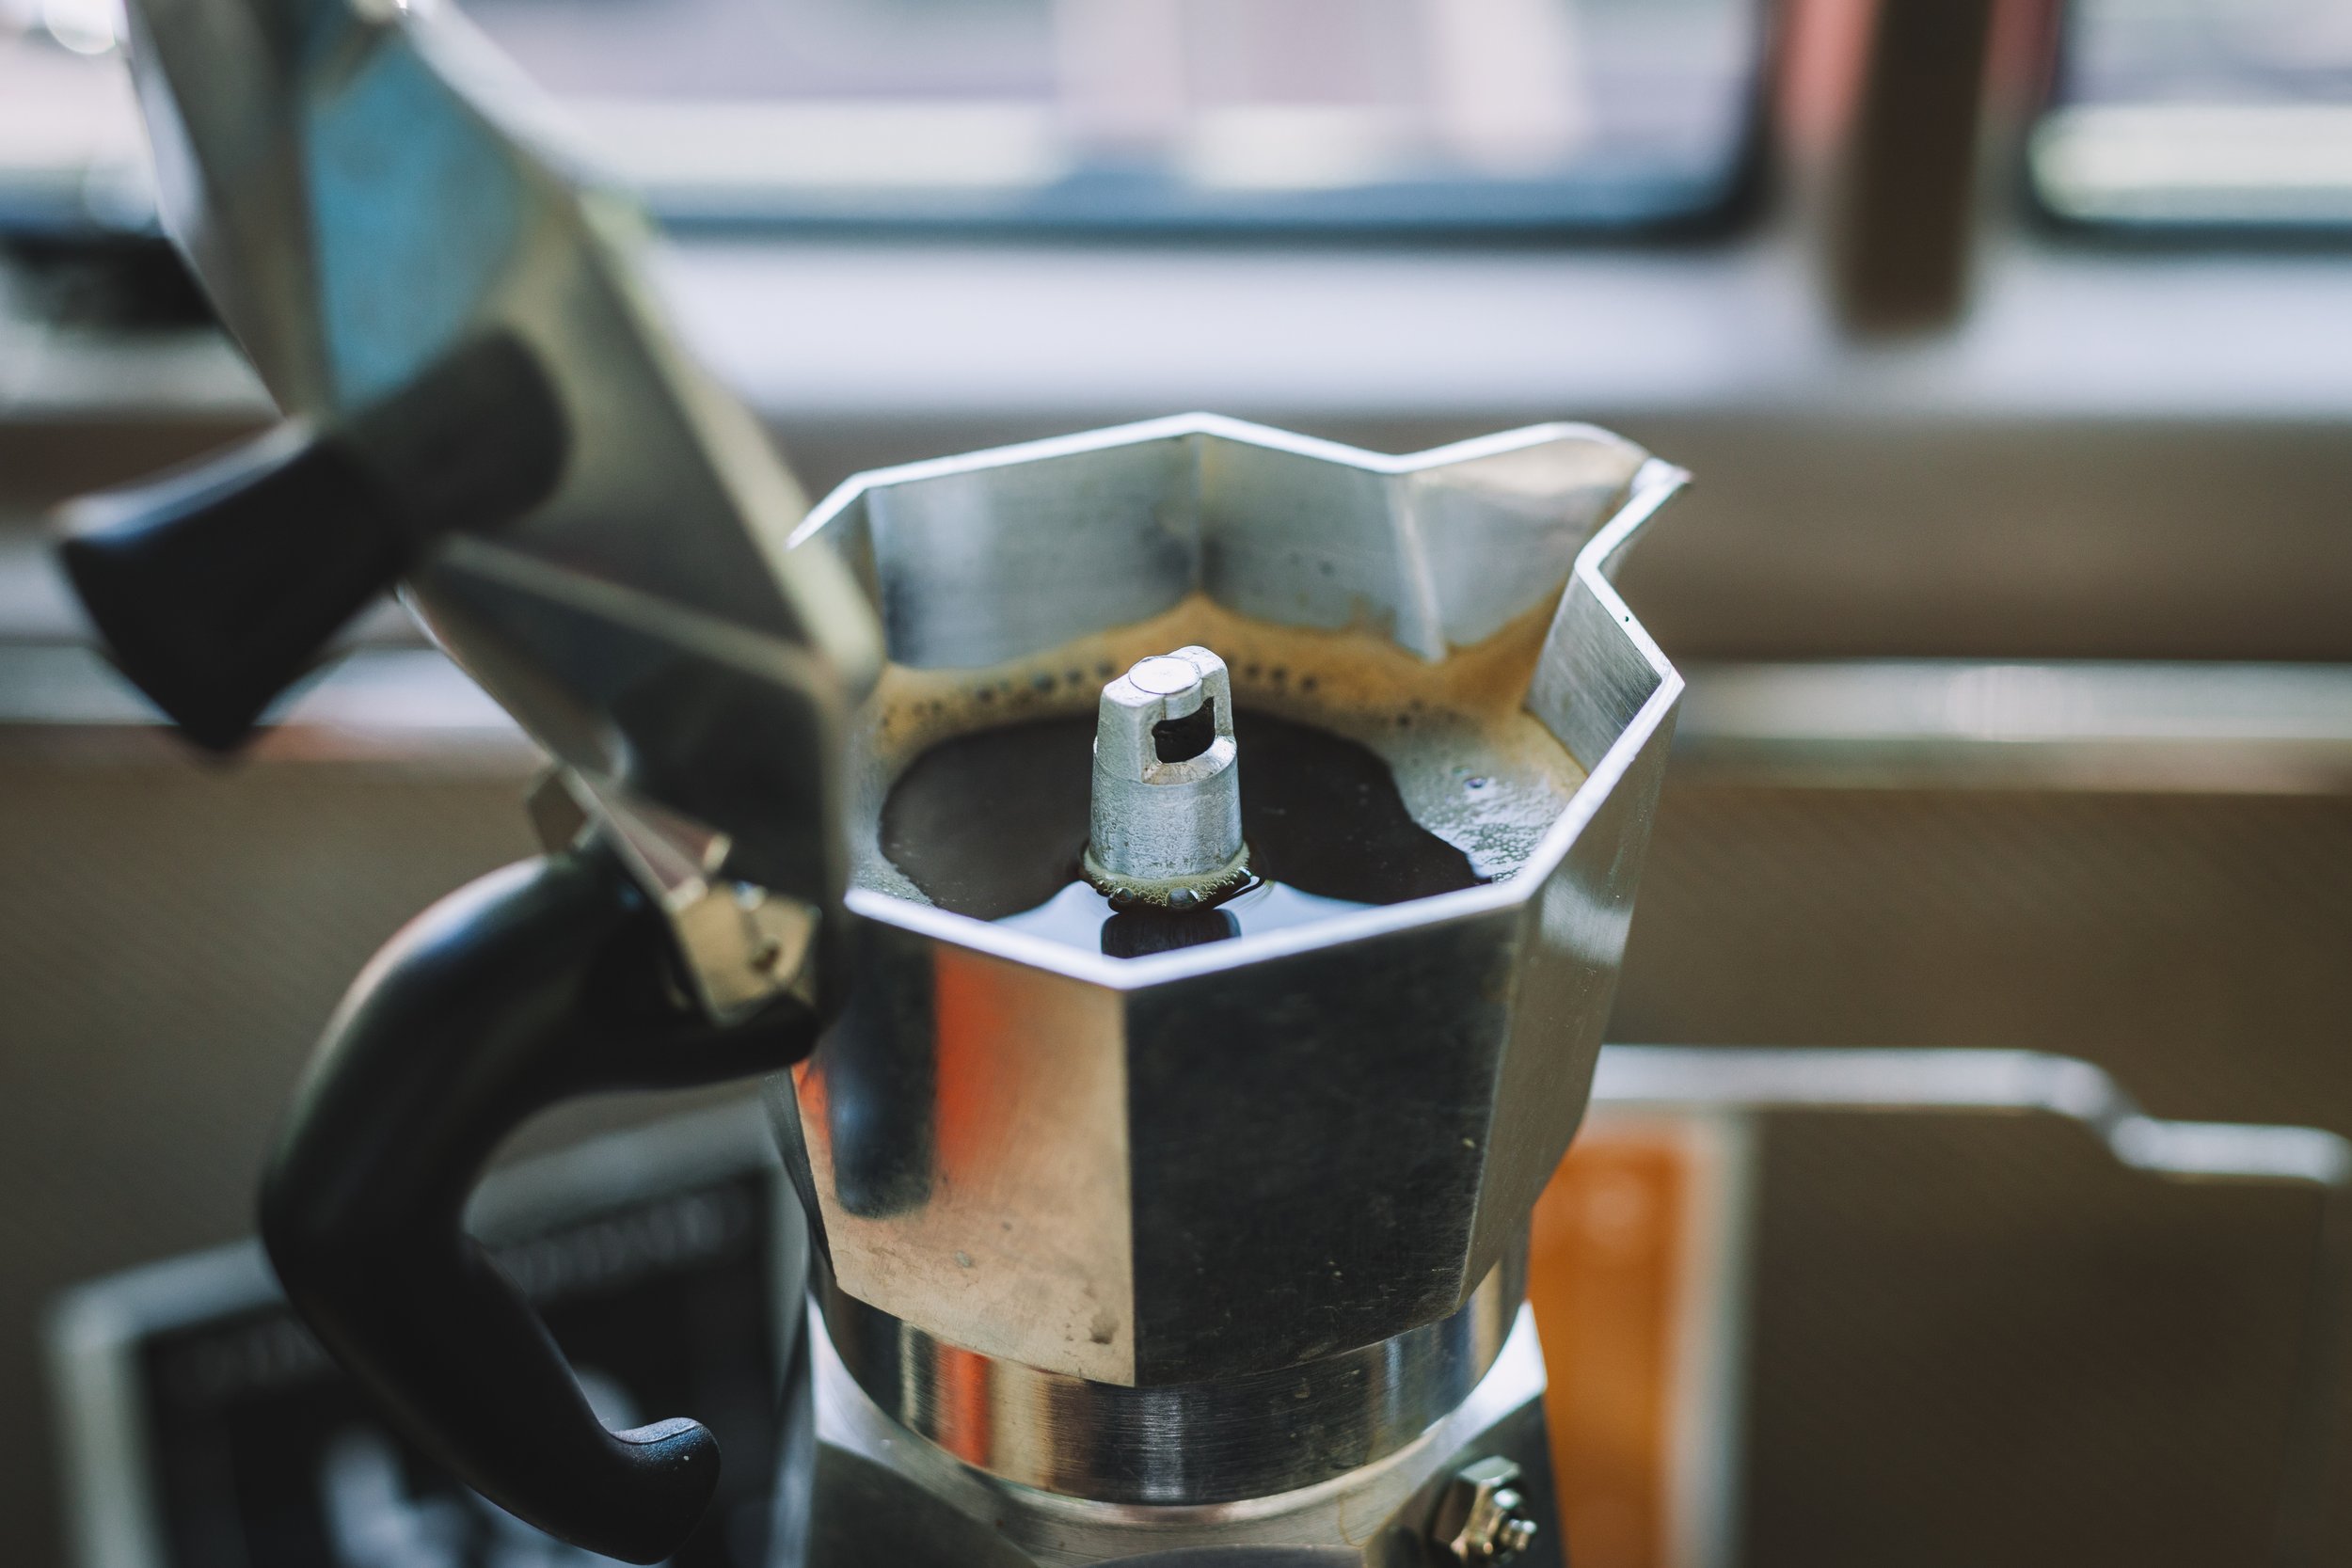 Going Old School with the Moka Pot — Loam Coffee